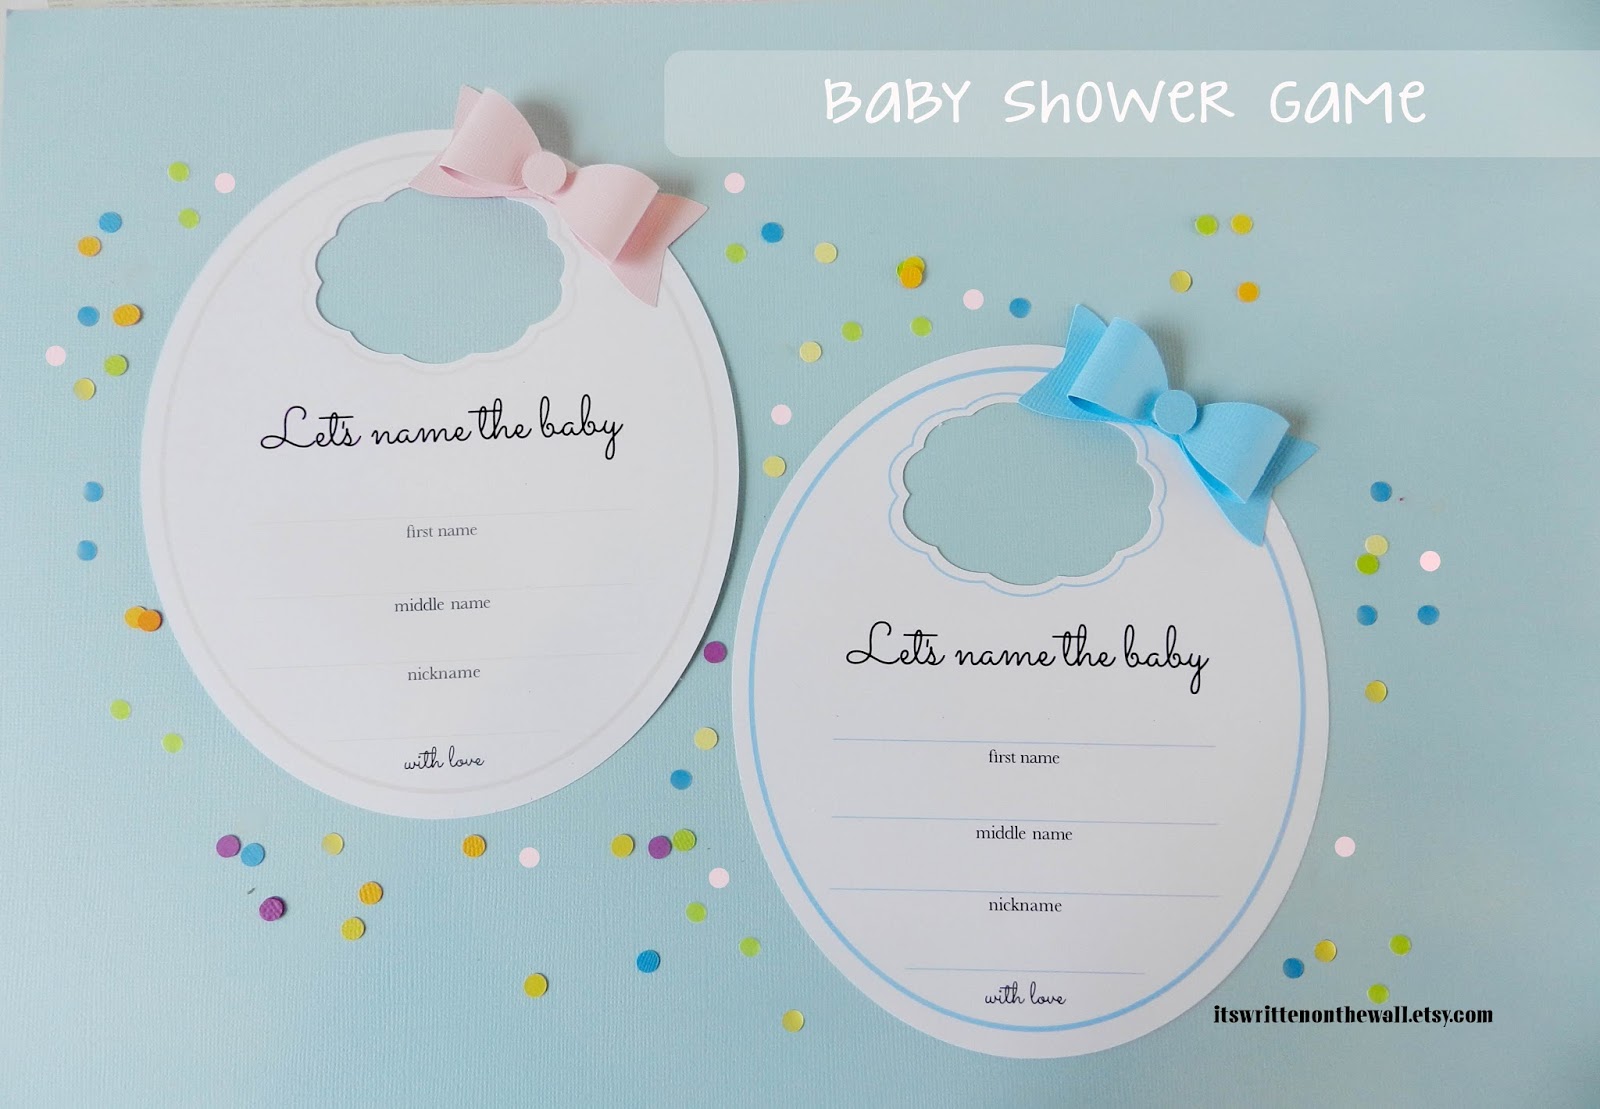 787 New baby shower game app 130 Baby Shower Party Games Your Guests Will LOVE .So DARLING! 